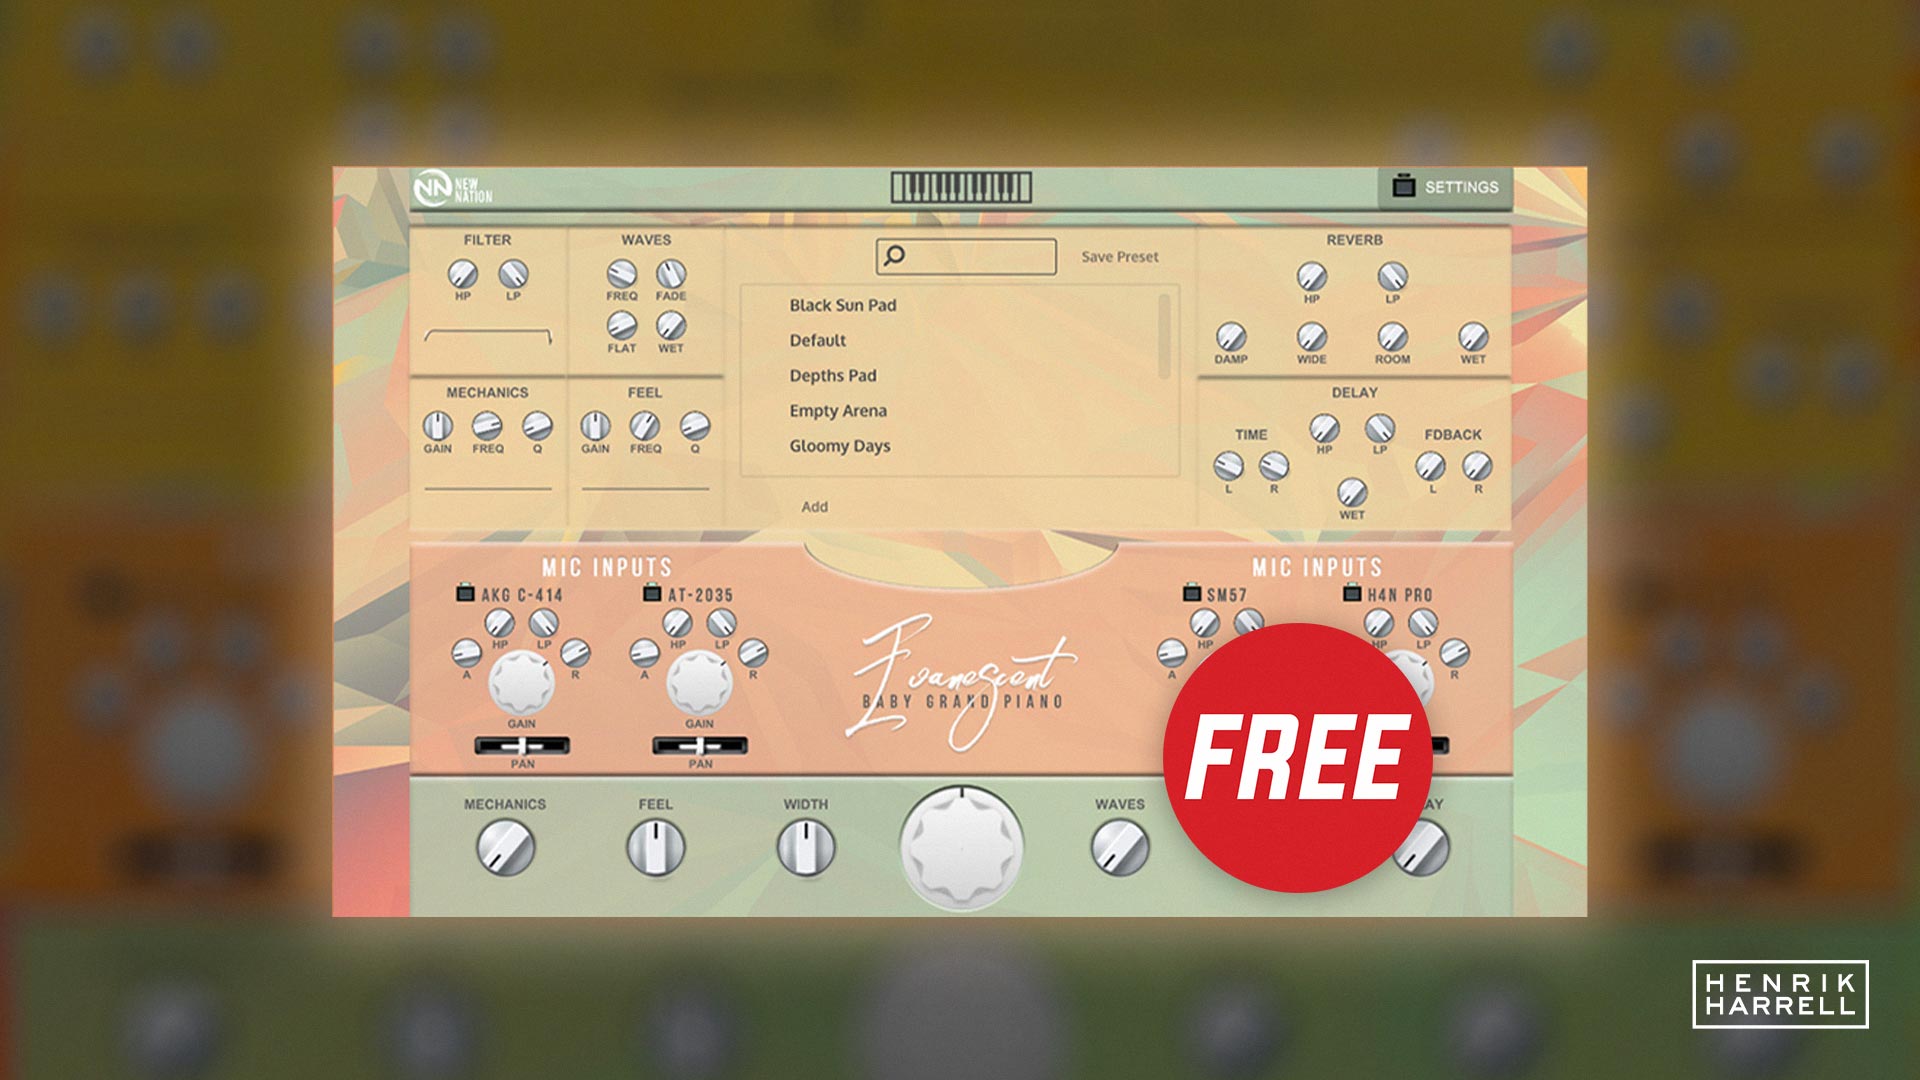 Evanescent – Baby Grand Piano VST is Free for a Limited Time